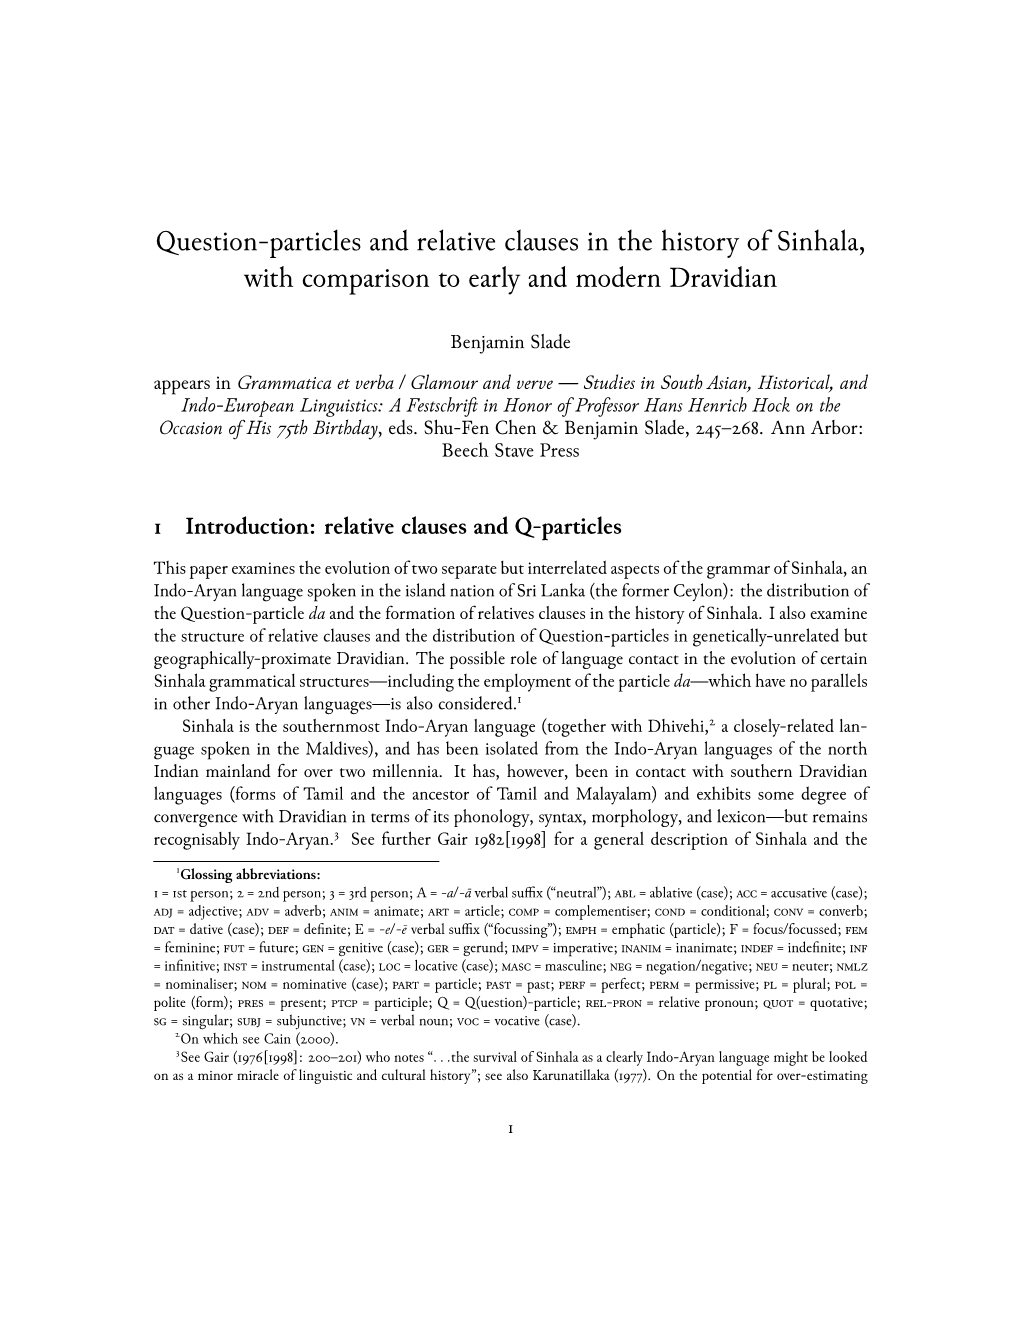 Question-Particles and Relative Clauses in the History of Sinhala, with Comparison to Early and Modern Dravidian